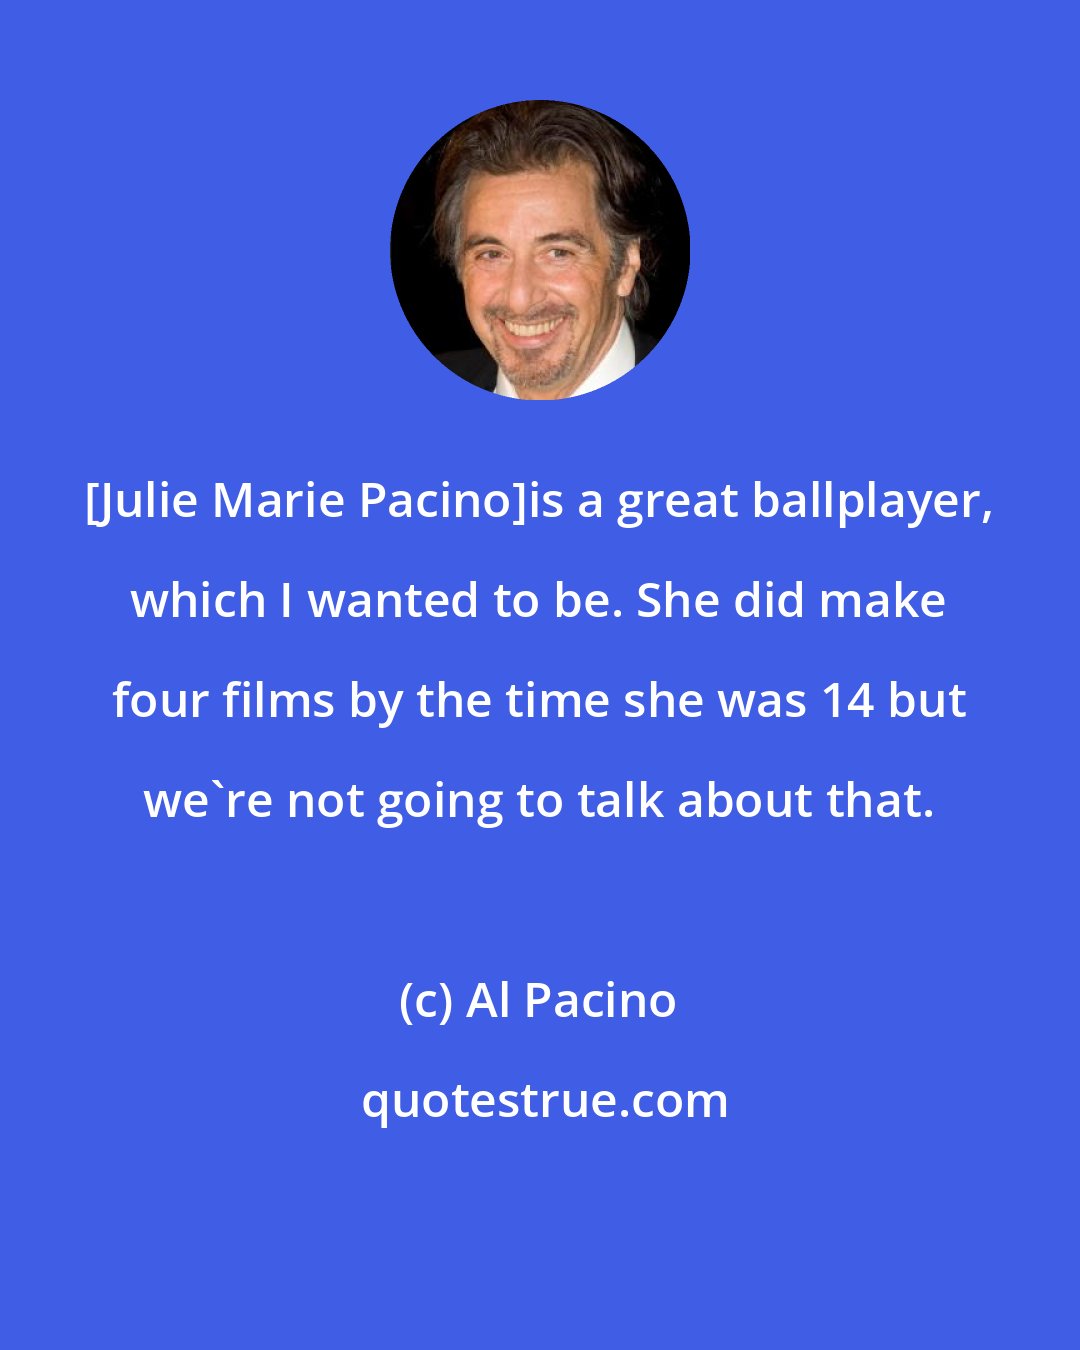 Al Pacino: [Julie Marie Pacino]is a great ballplayer, which I wanted to be. She did make four films by the time she was 14 but we're not going to talk about that.